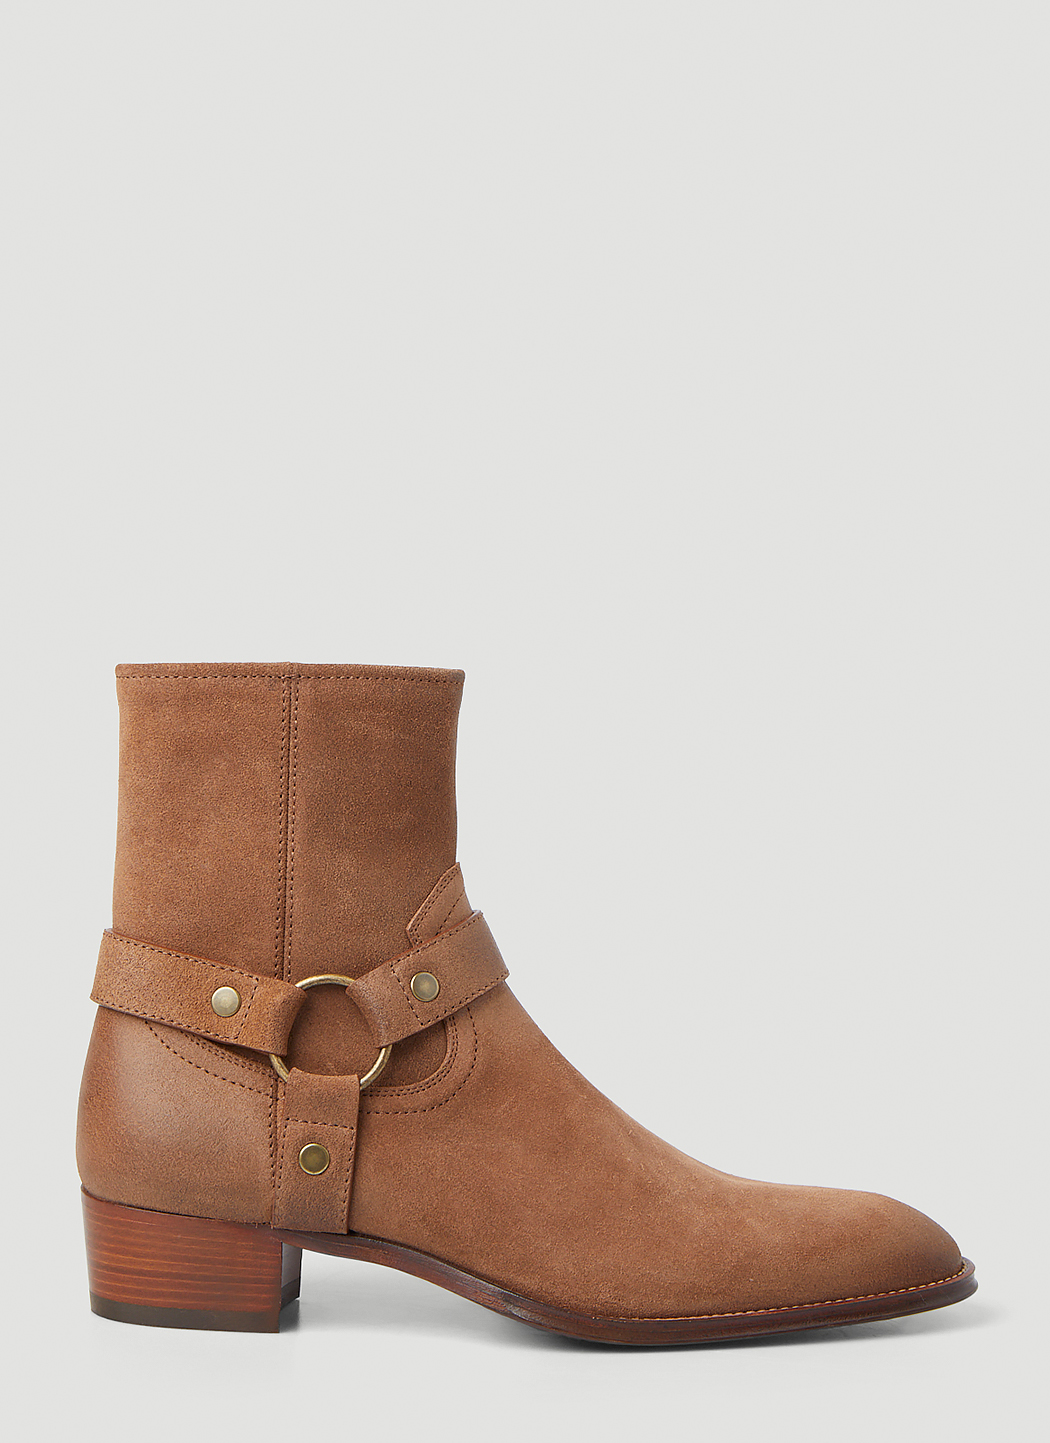 Wyatt Harness Ankle Boots